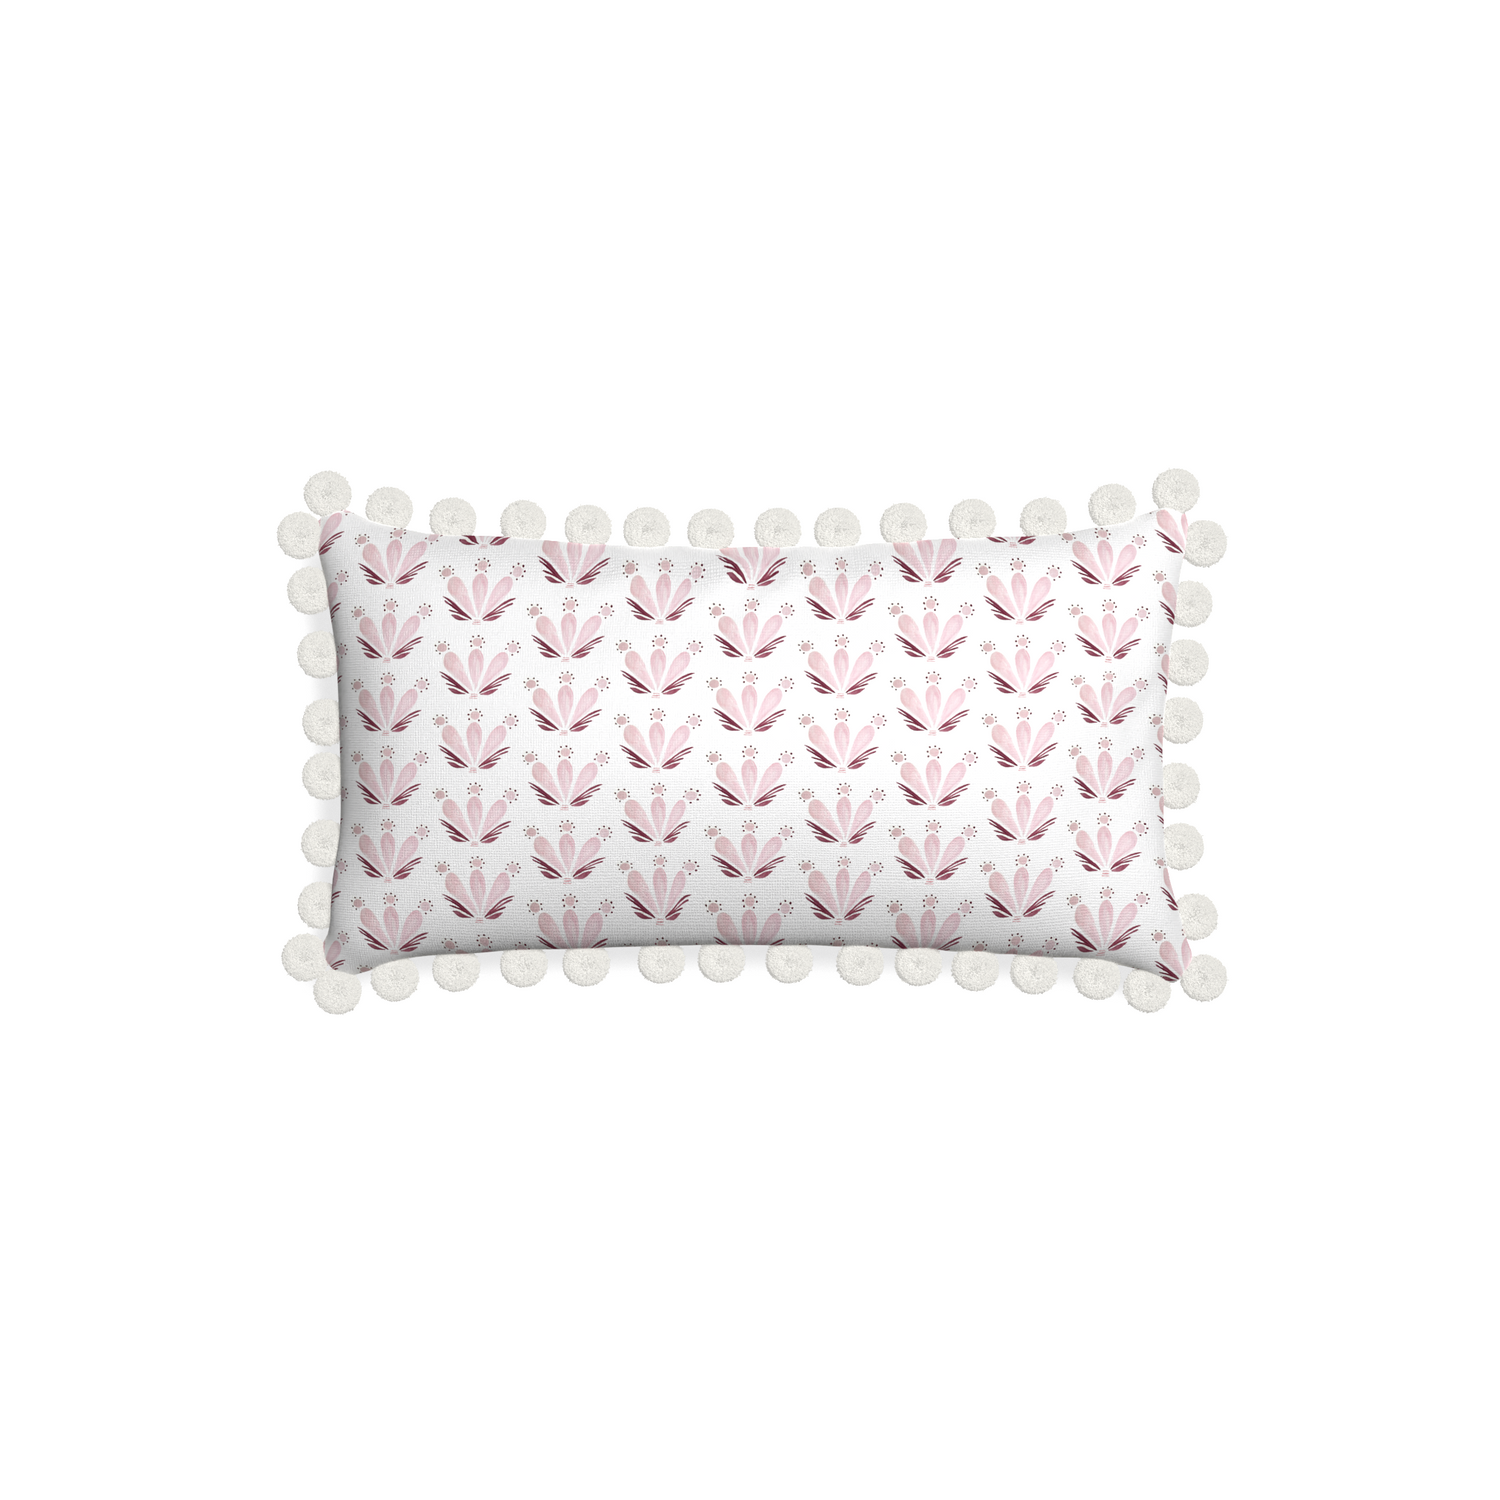 Petite-lumbar serena pink custom pink & burgundy drop repeat floralpillow with snow pom pom on white background